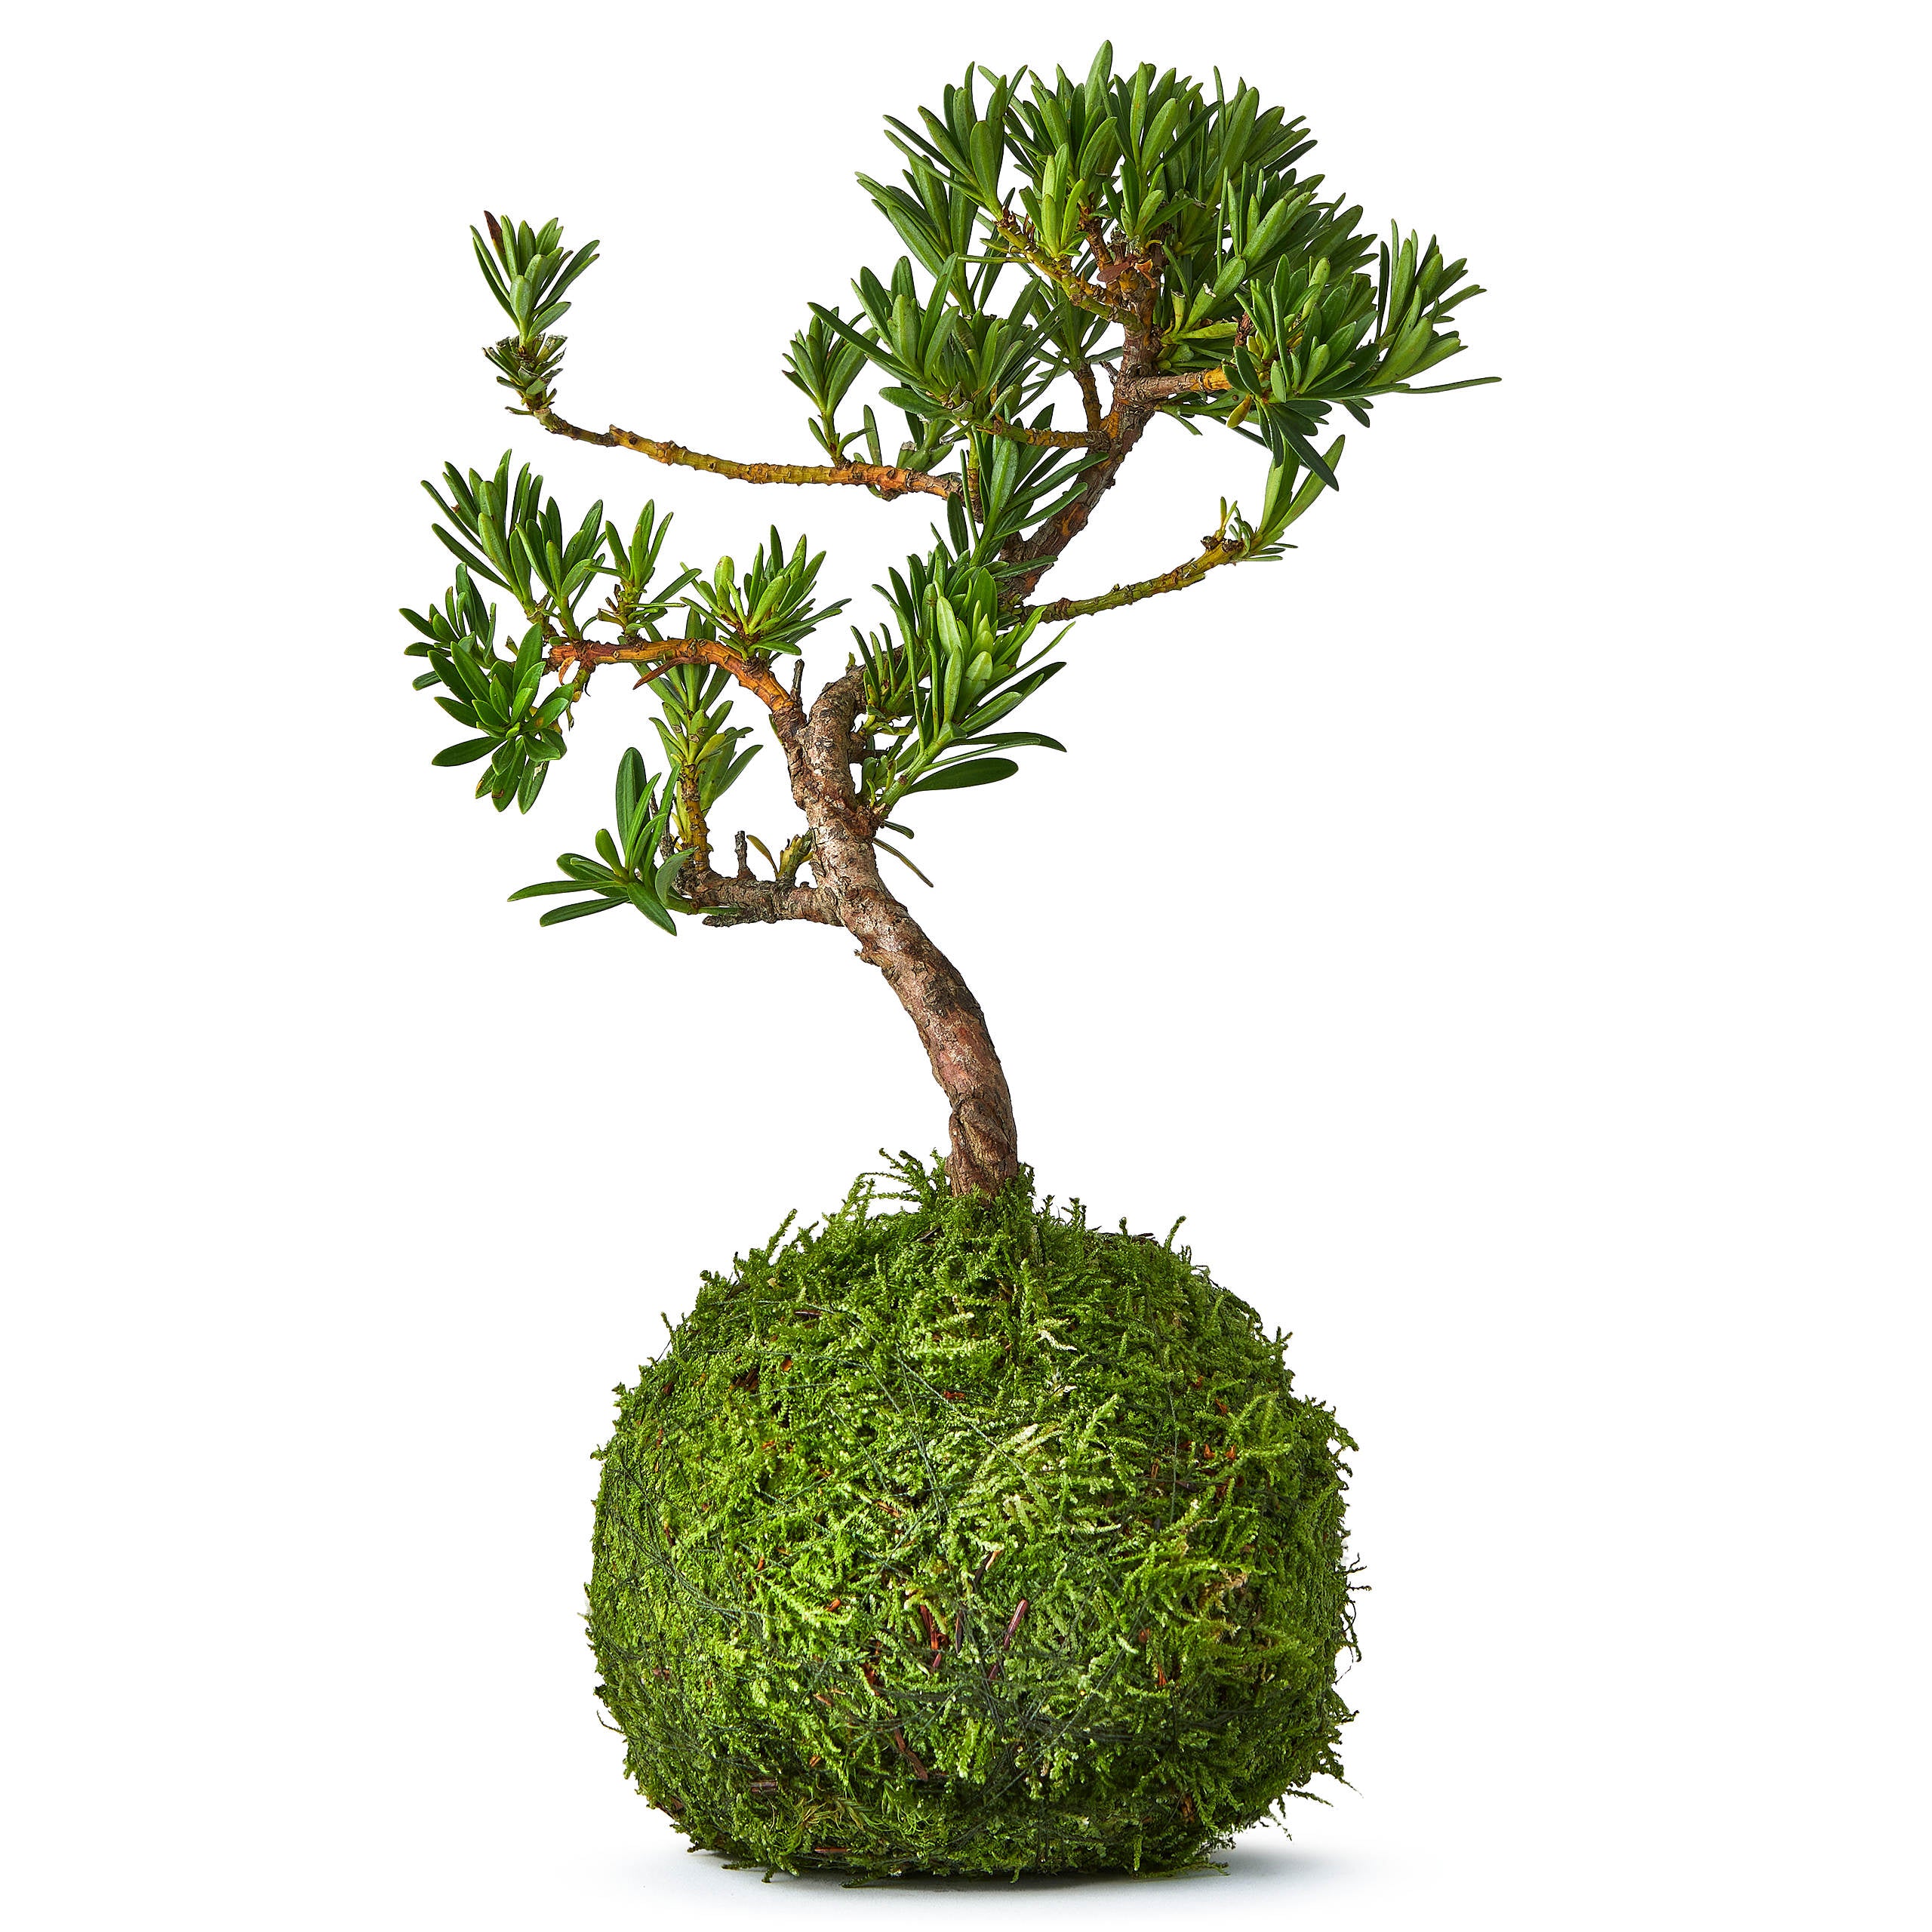 Make Christmas Merry and Healthy with Bonsai Plants Aplenty!